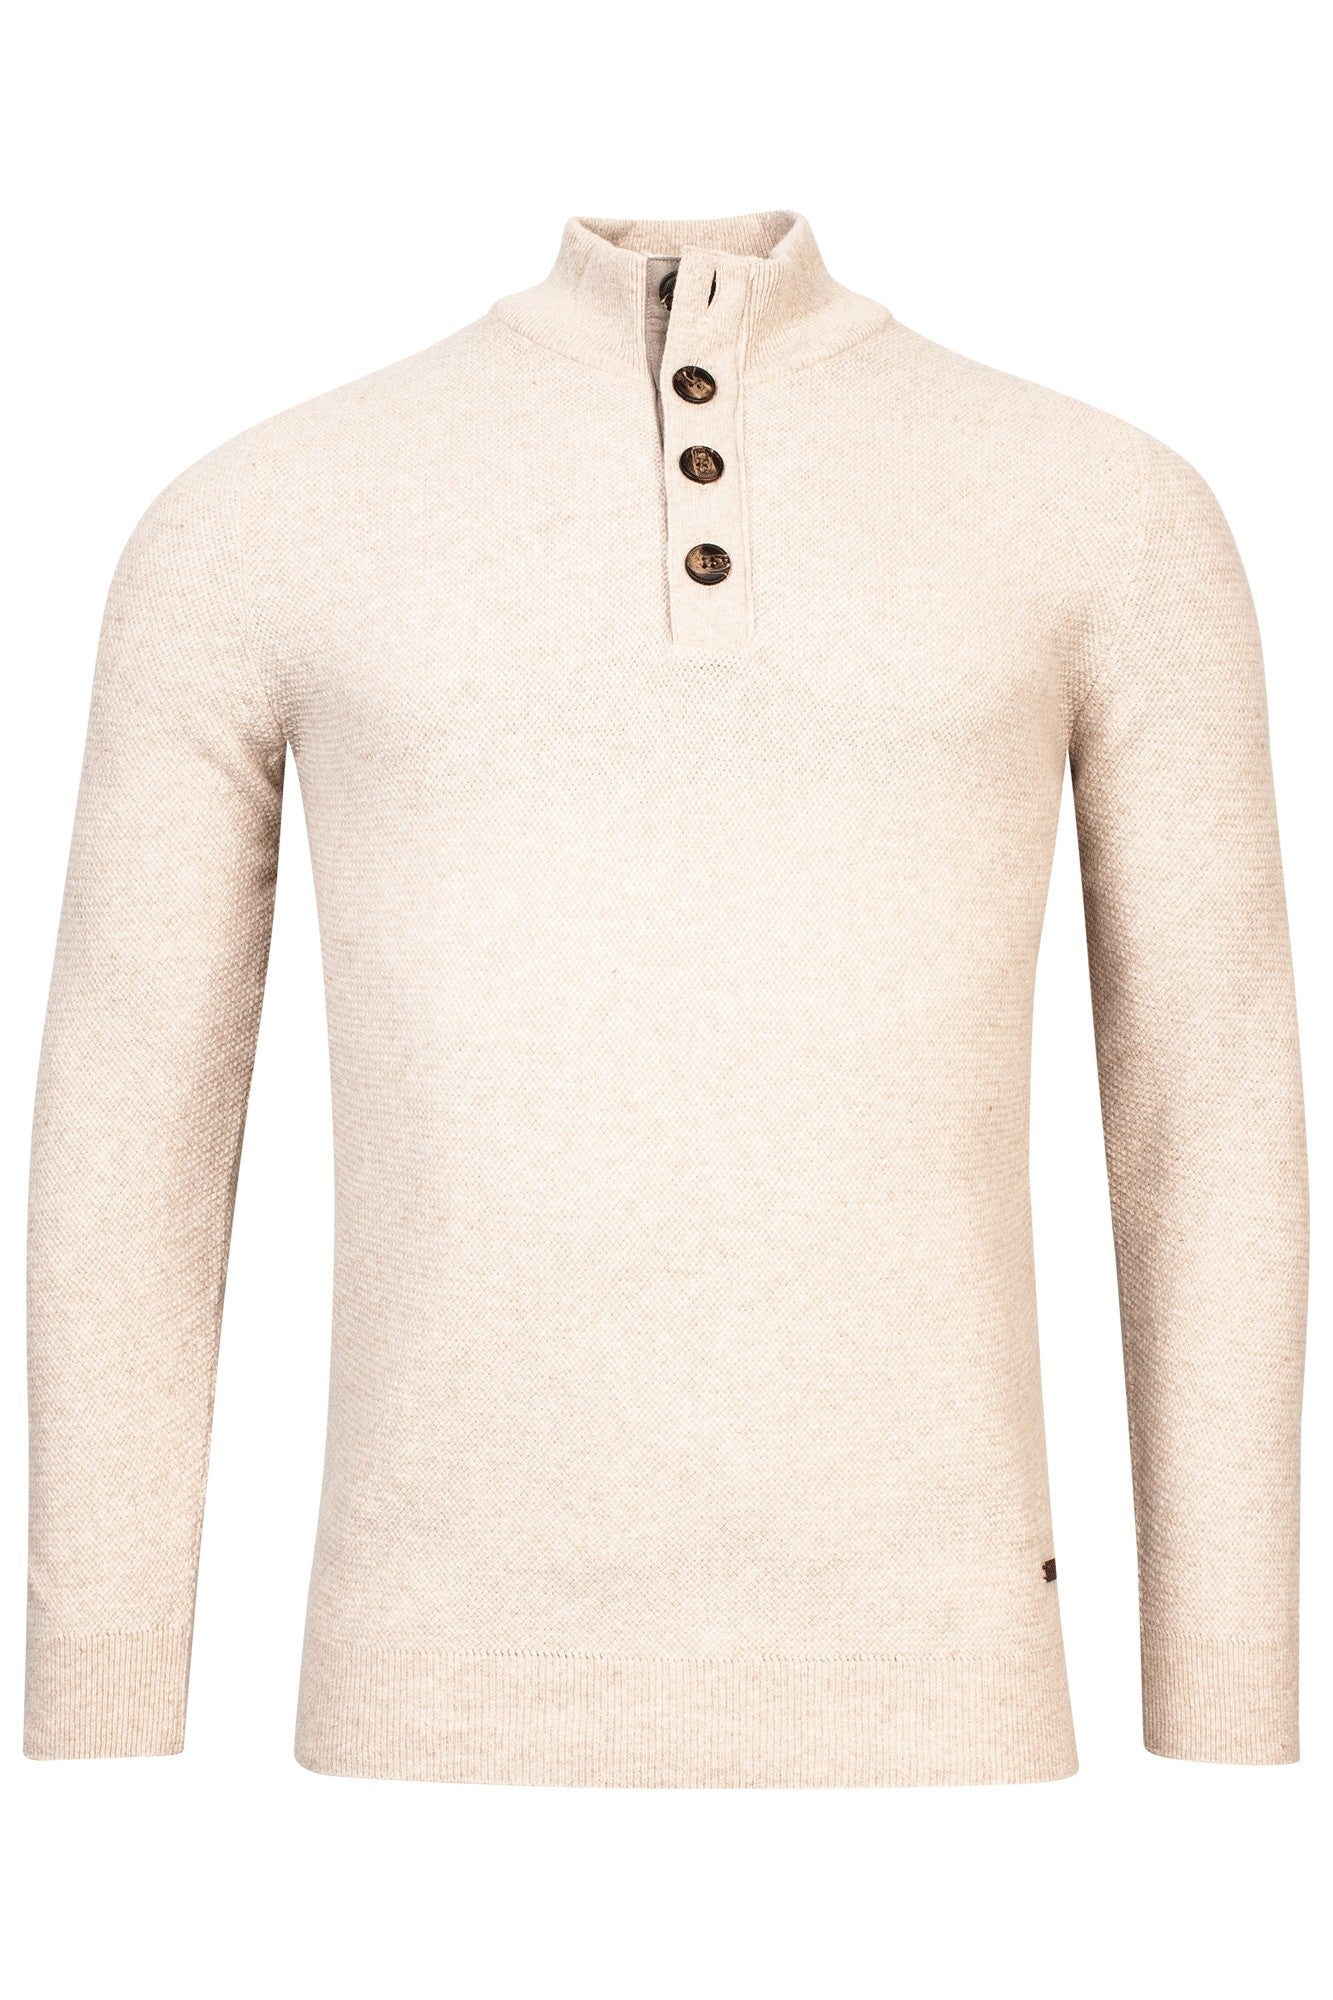 Giordano Quality Claytons Beige Sweater Half Button Clothing –